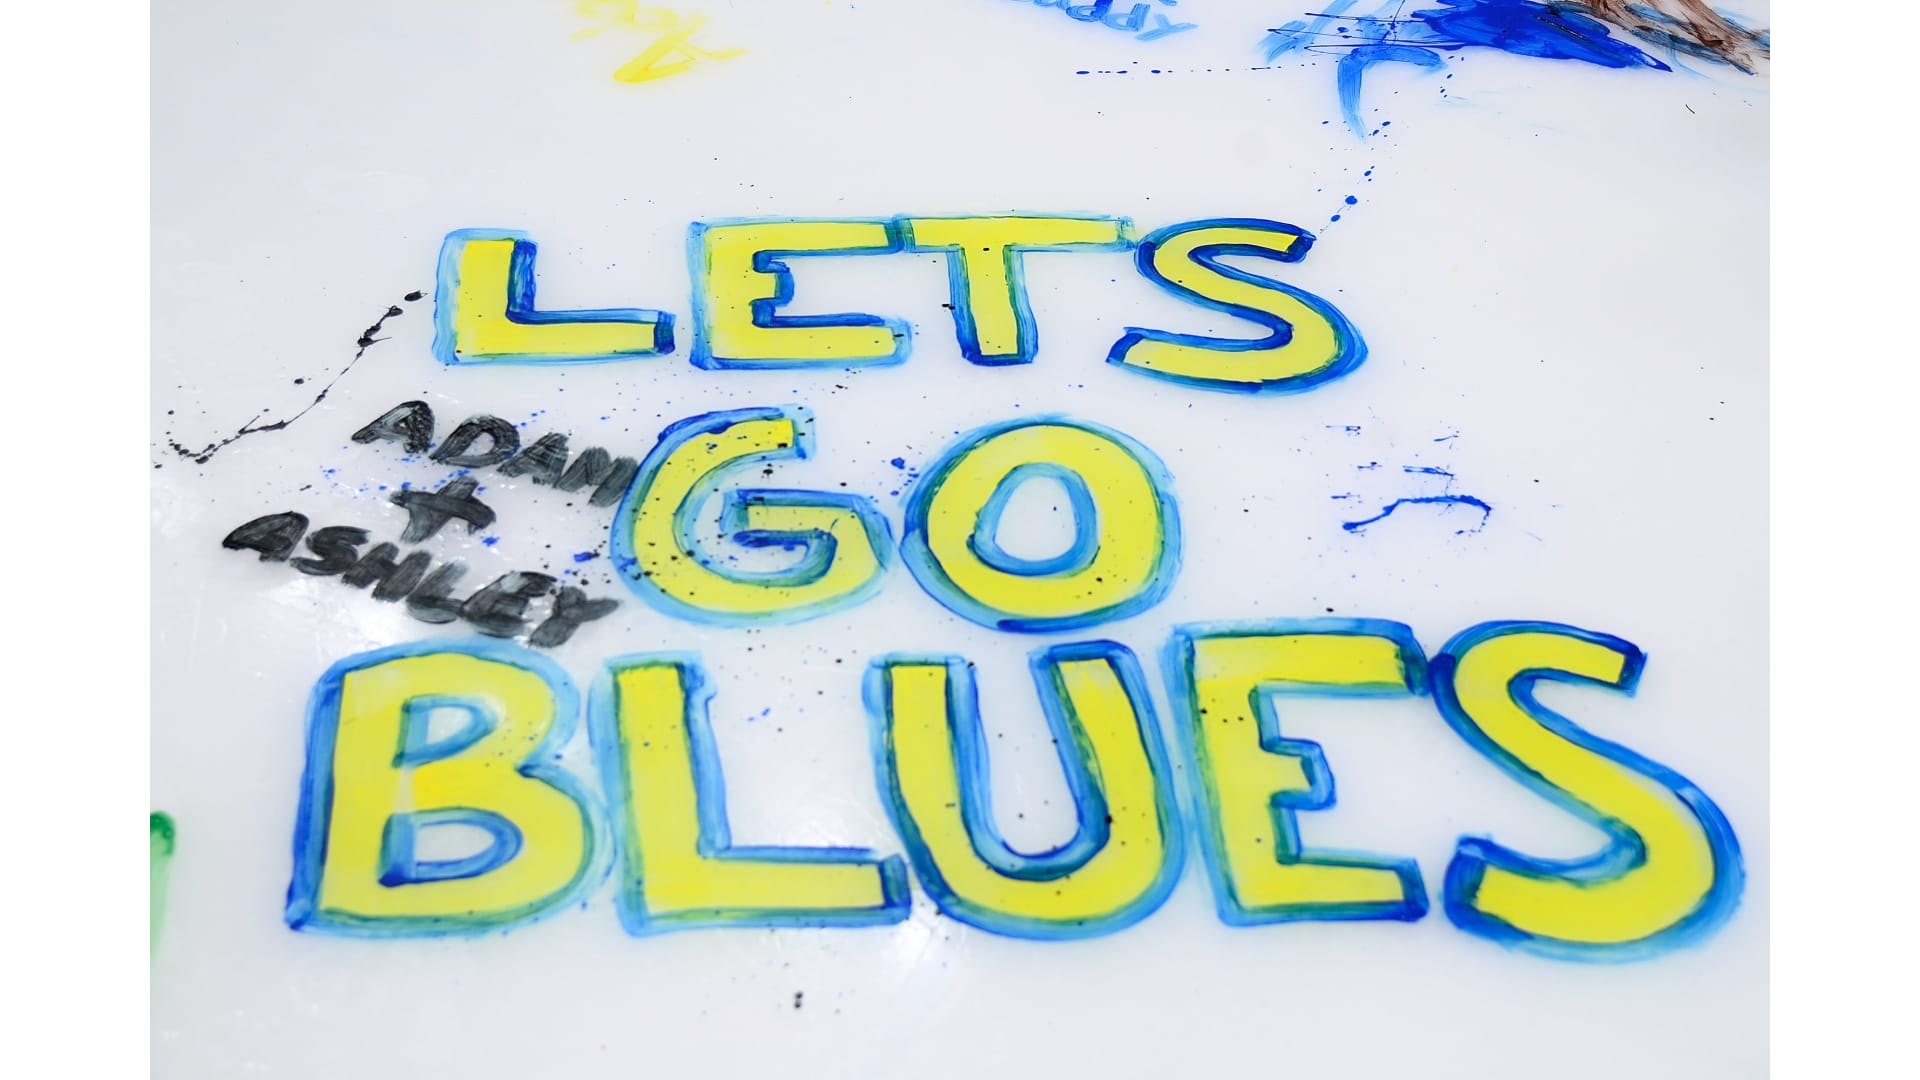 St Louis Blues Projects  Photos, videos, logos, illustrations and